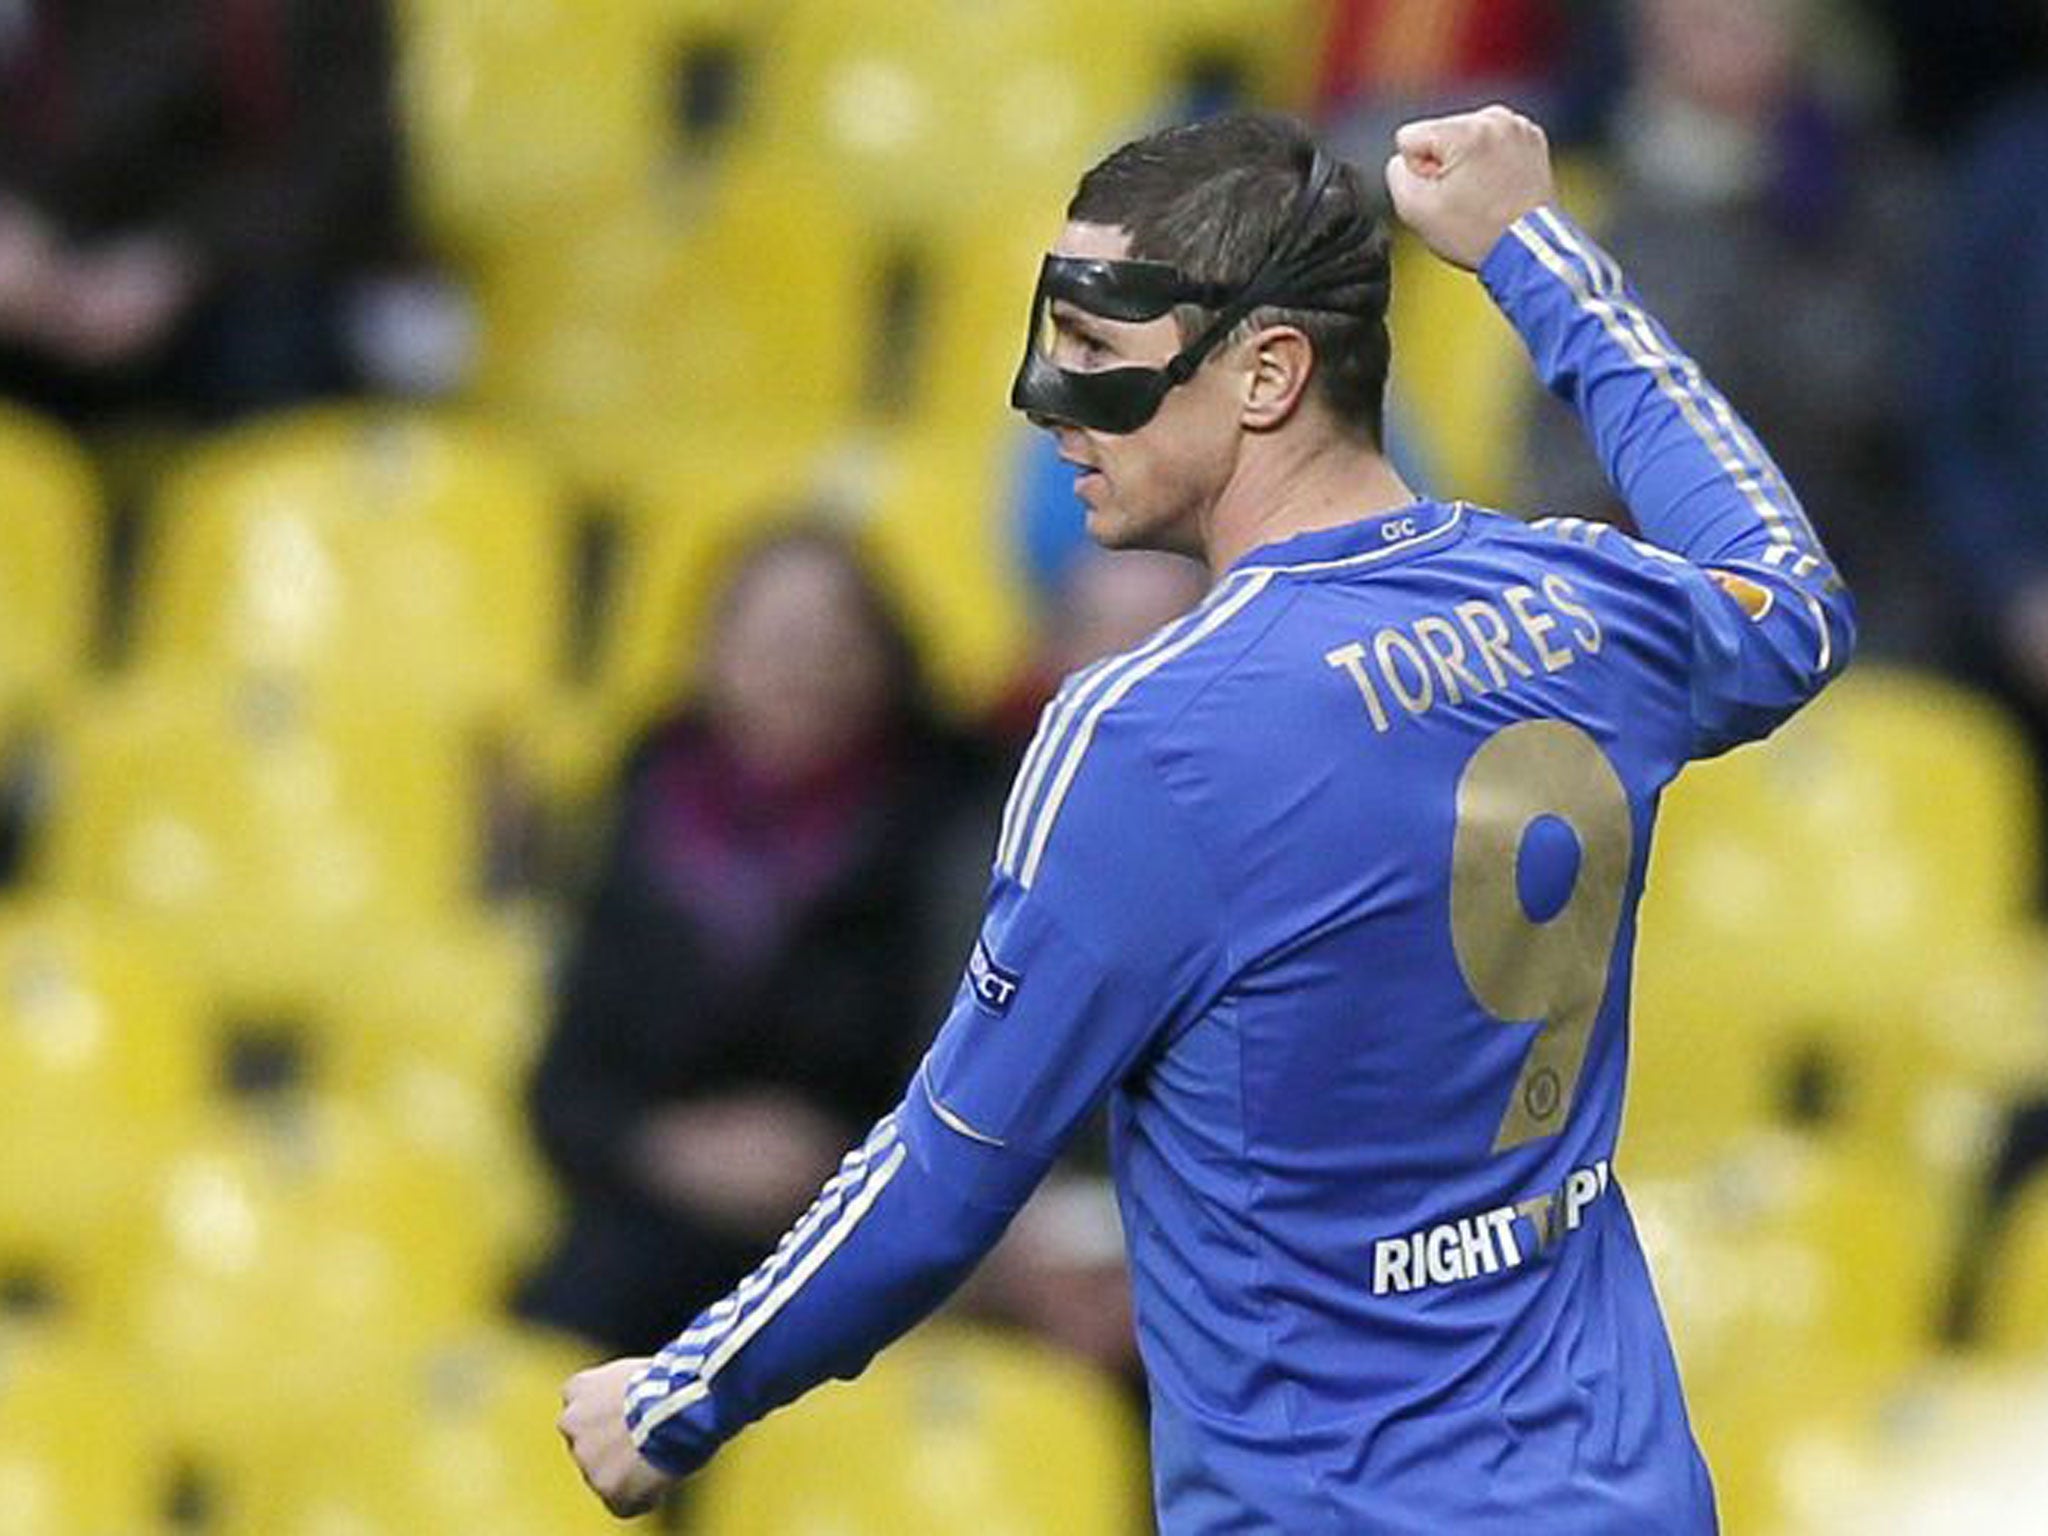 Fernando Torres put Chelsea in front inside five minutes with a fine lob to put Chelsea on course